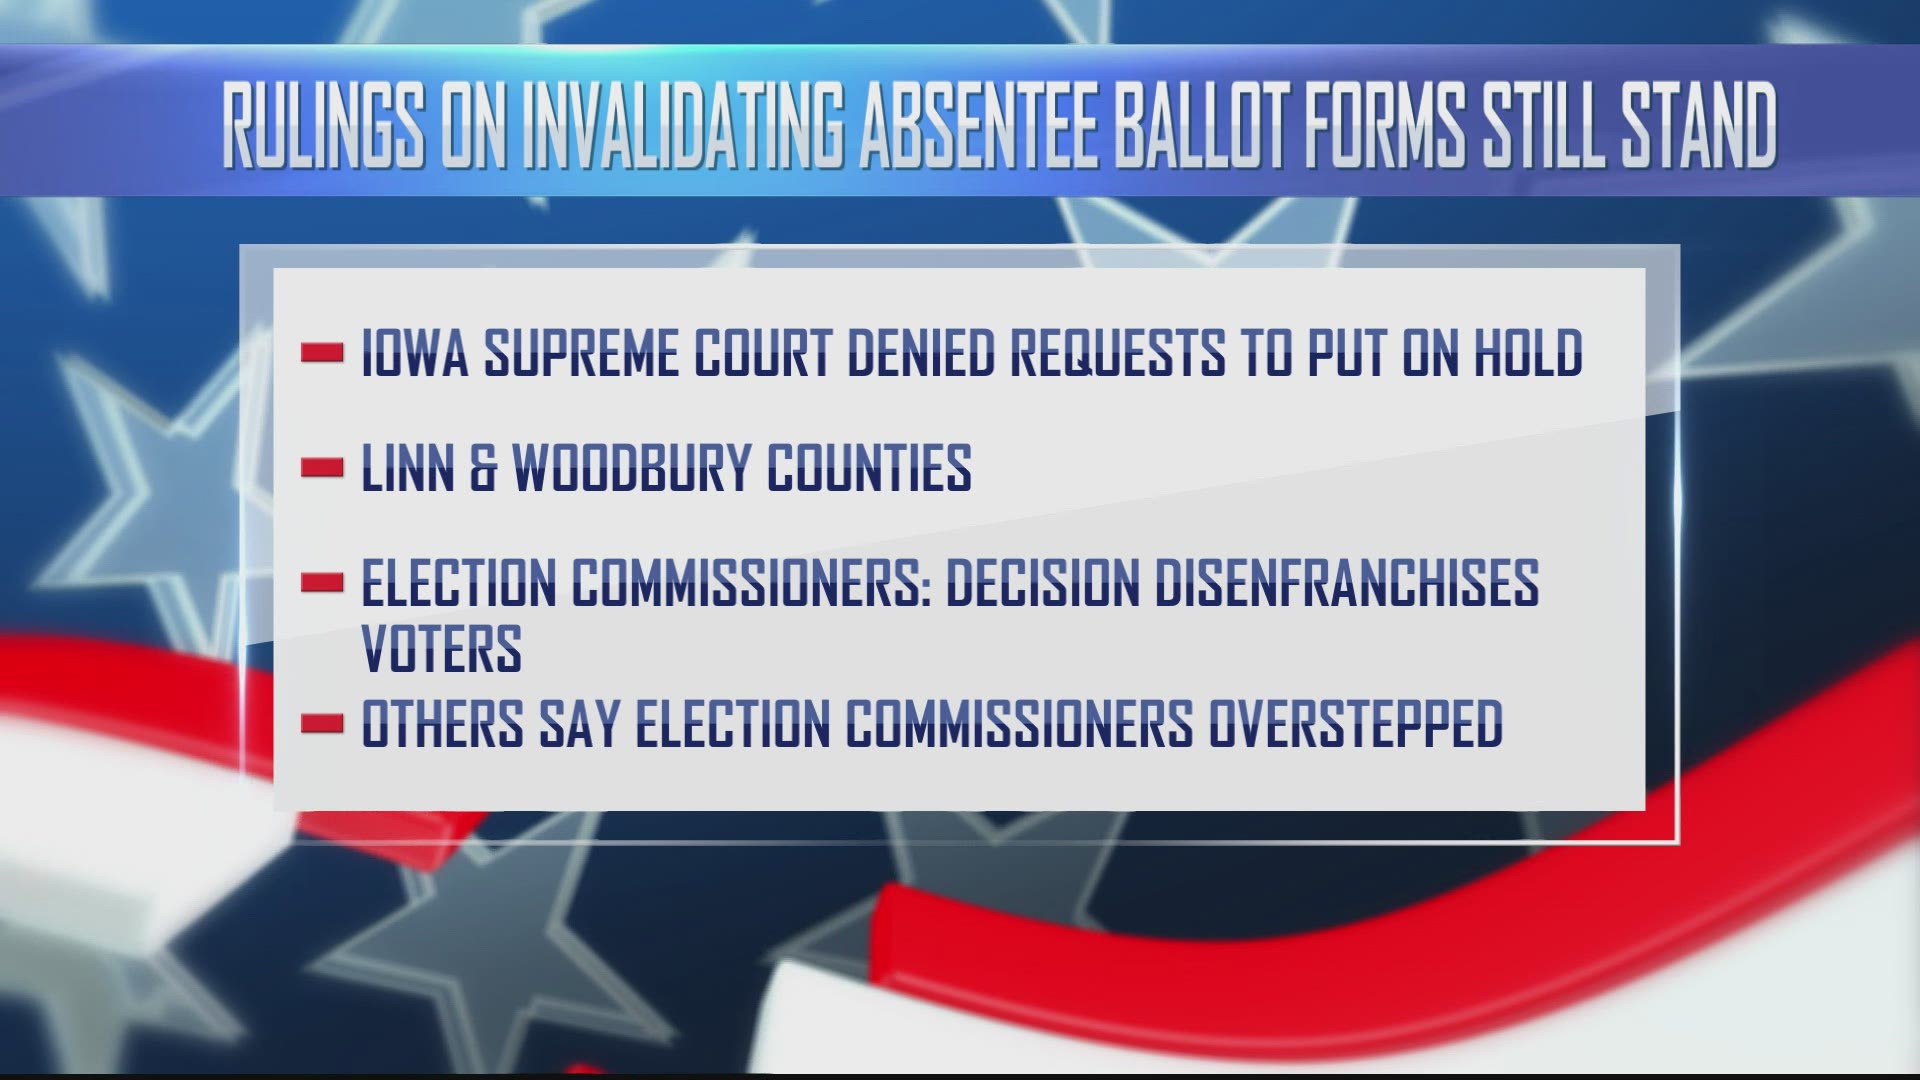 District judges have ruled certain counties overstepped by sending absentee ballot request forms to voters with their personal information already filled in.